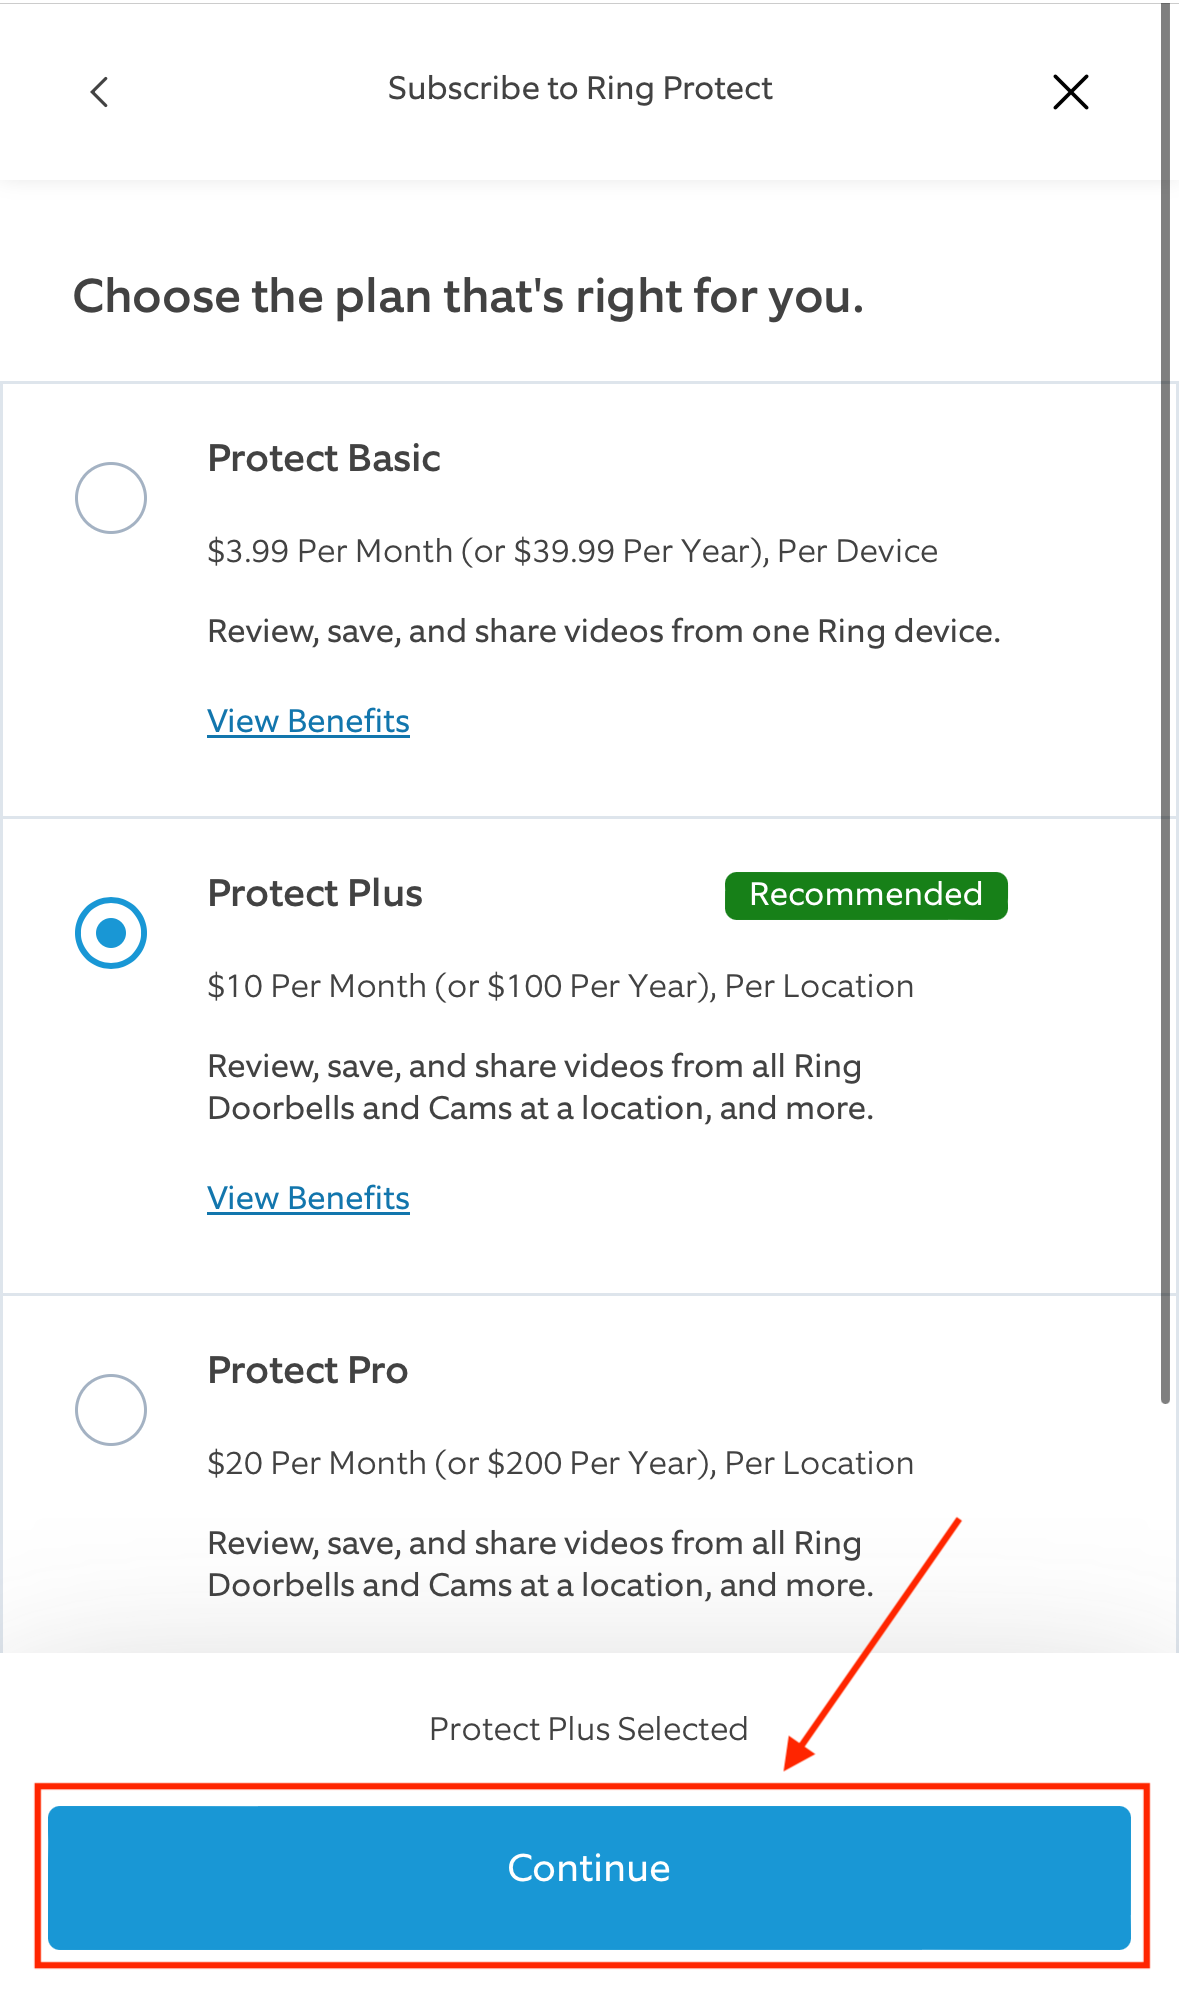 How to Subscribe to Ring Protect 